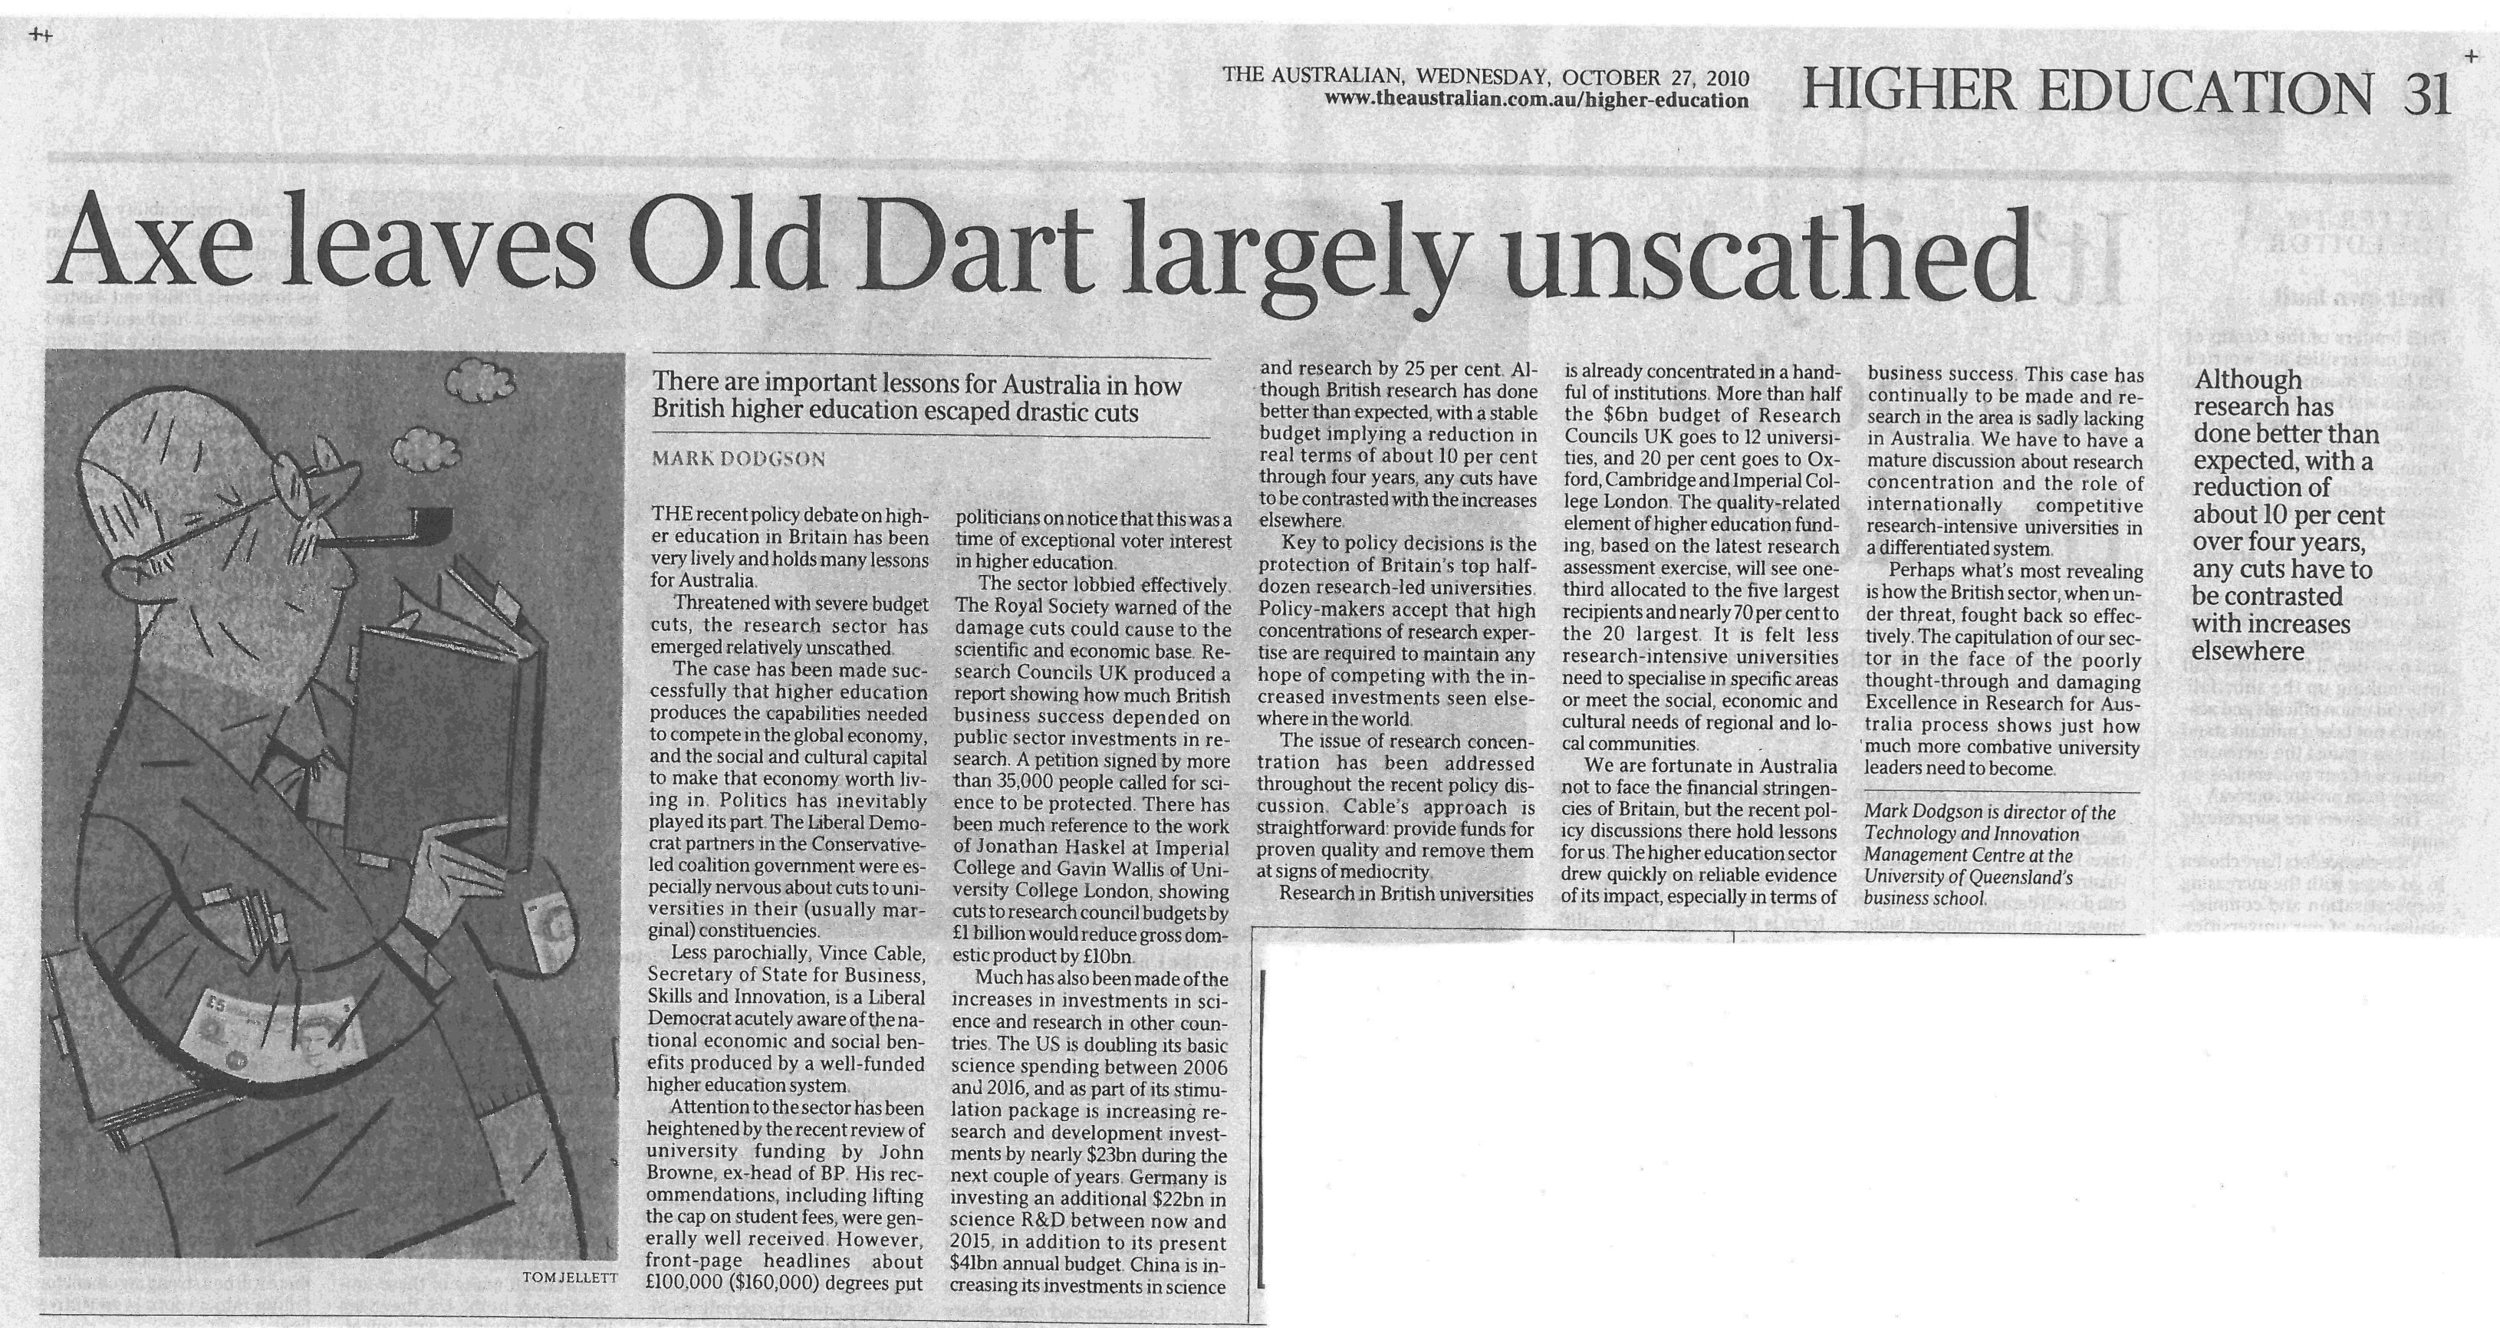 "Axe leave Old Dart largely unscathed" 27/10/2010